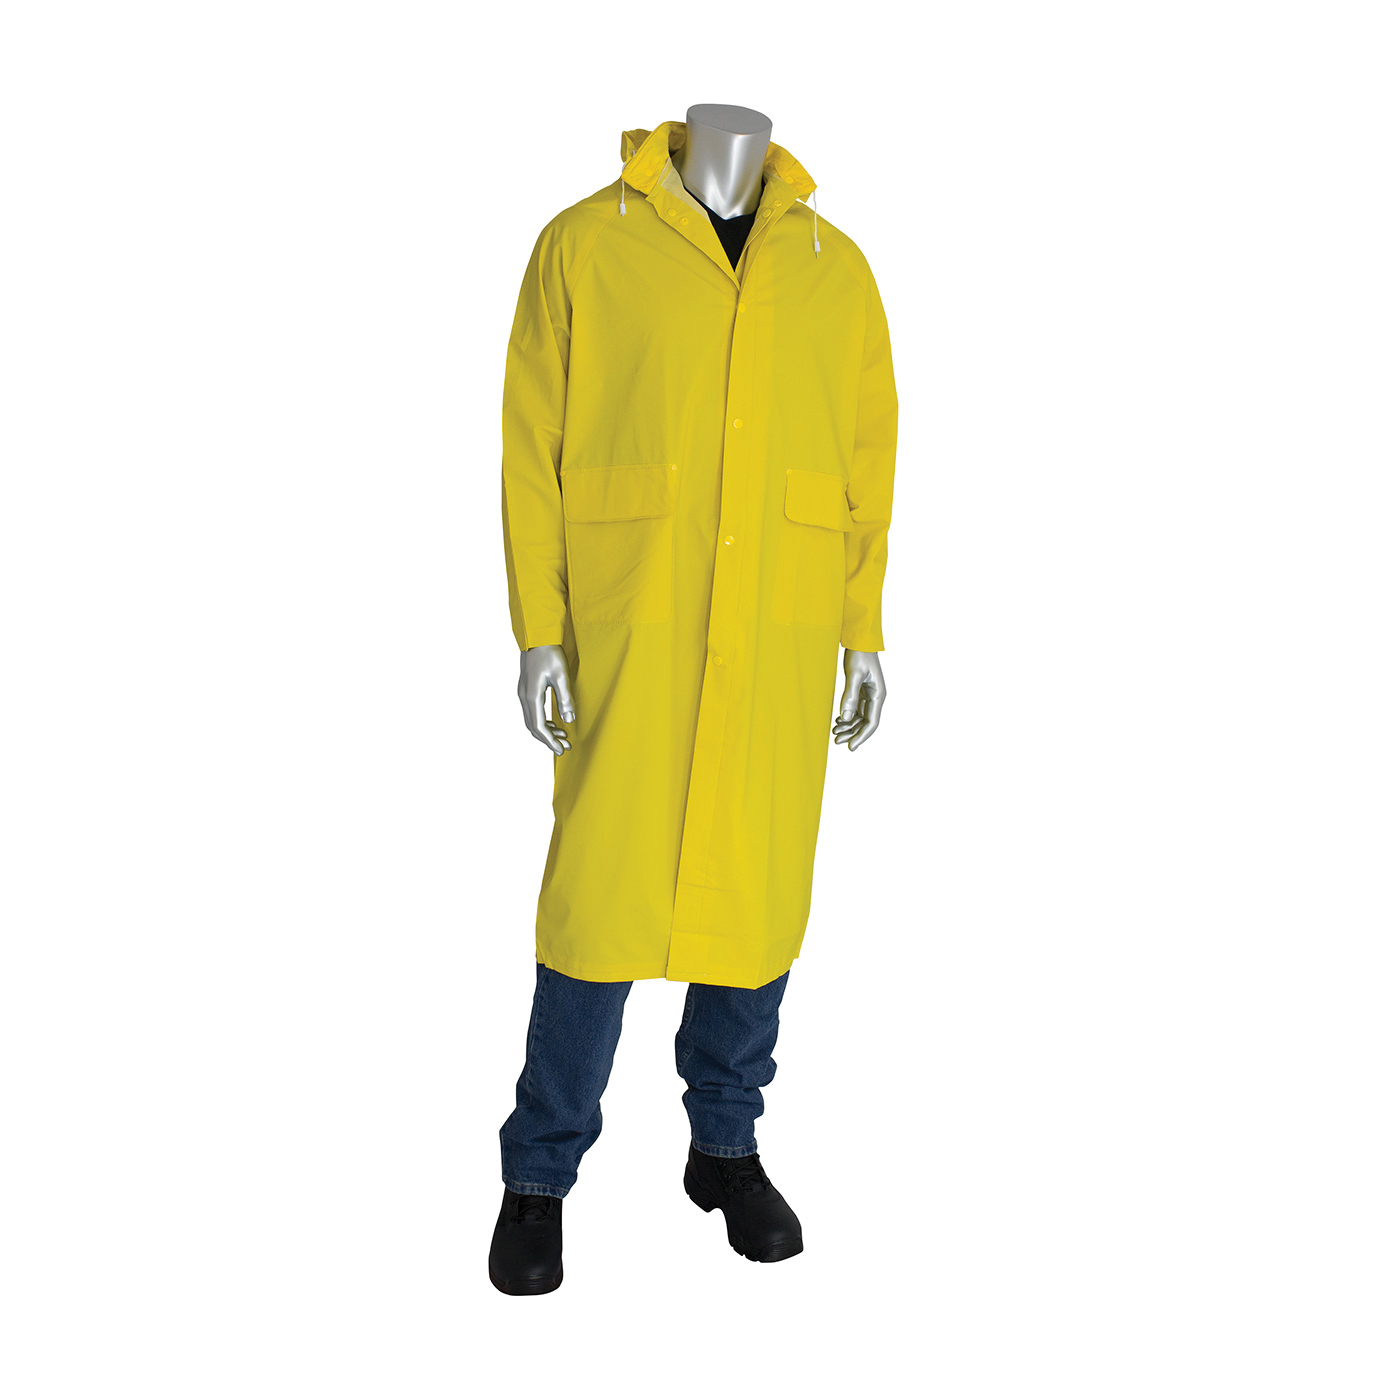 PIP® FALCON™ Base35FR™ 205-300FR/XL 2-Piece Premium Rain Coat, Unisex, XL, Yellow, Corduroy/Polyester/PVC, Resists: Flame and Water, Specifications Met: ASTM D6413